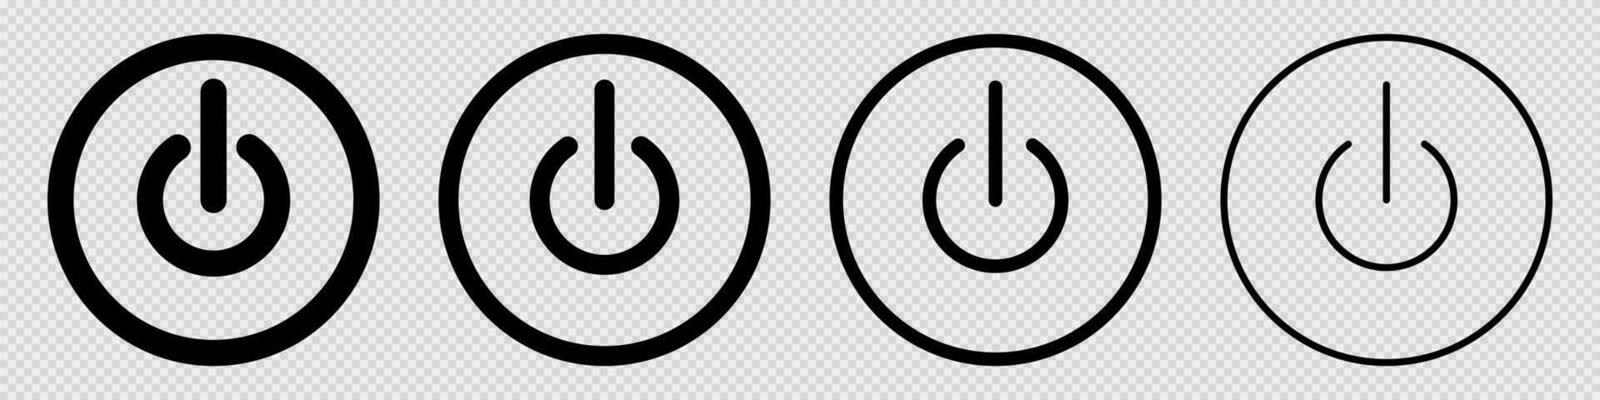 What Is a Power Button and What Are the On/Off Symbols?